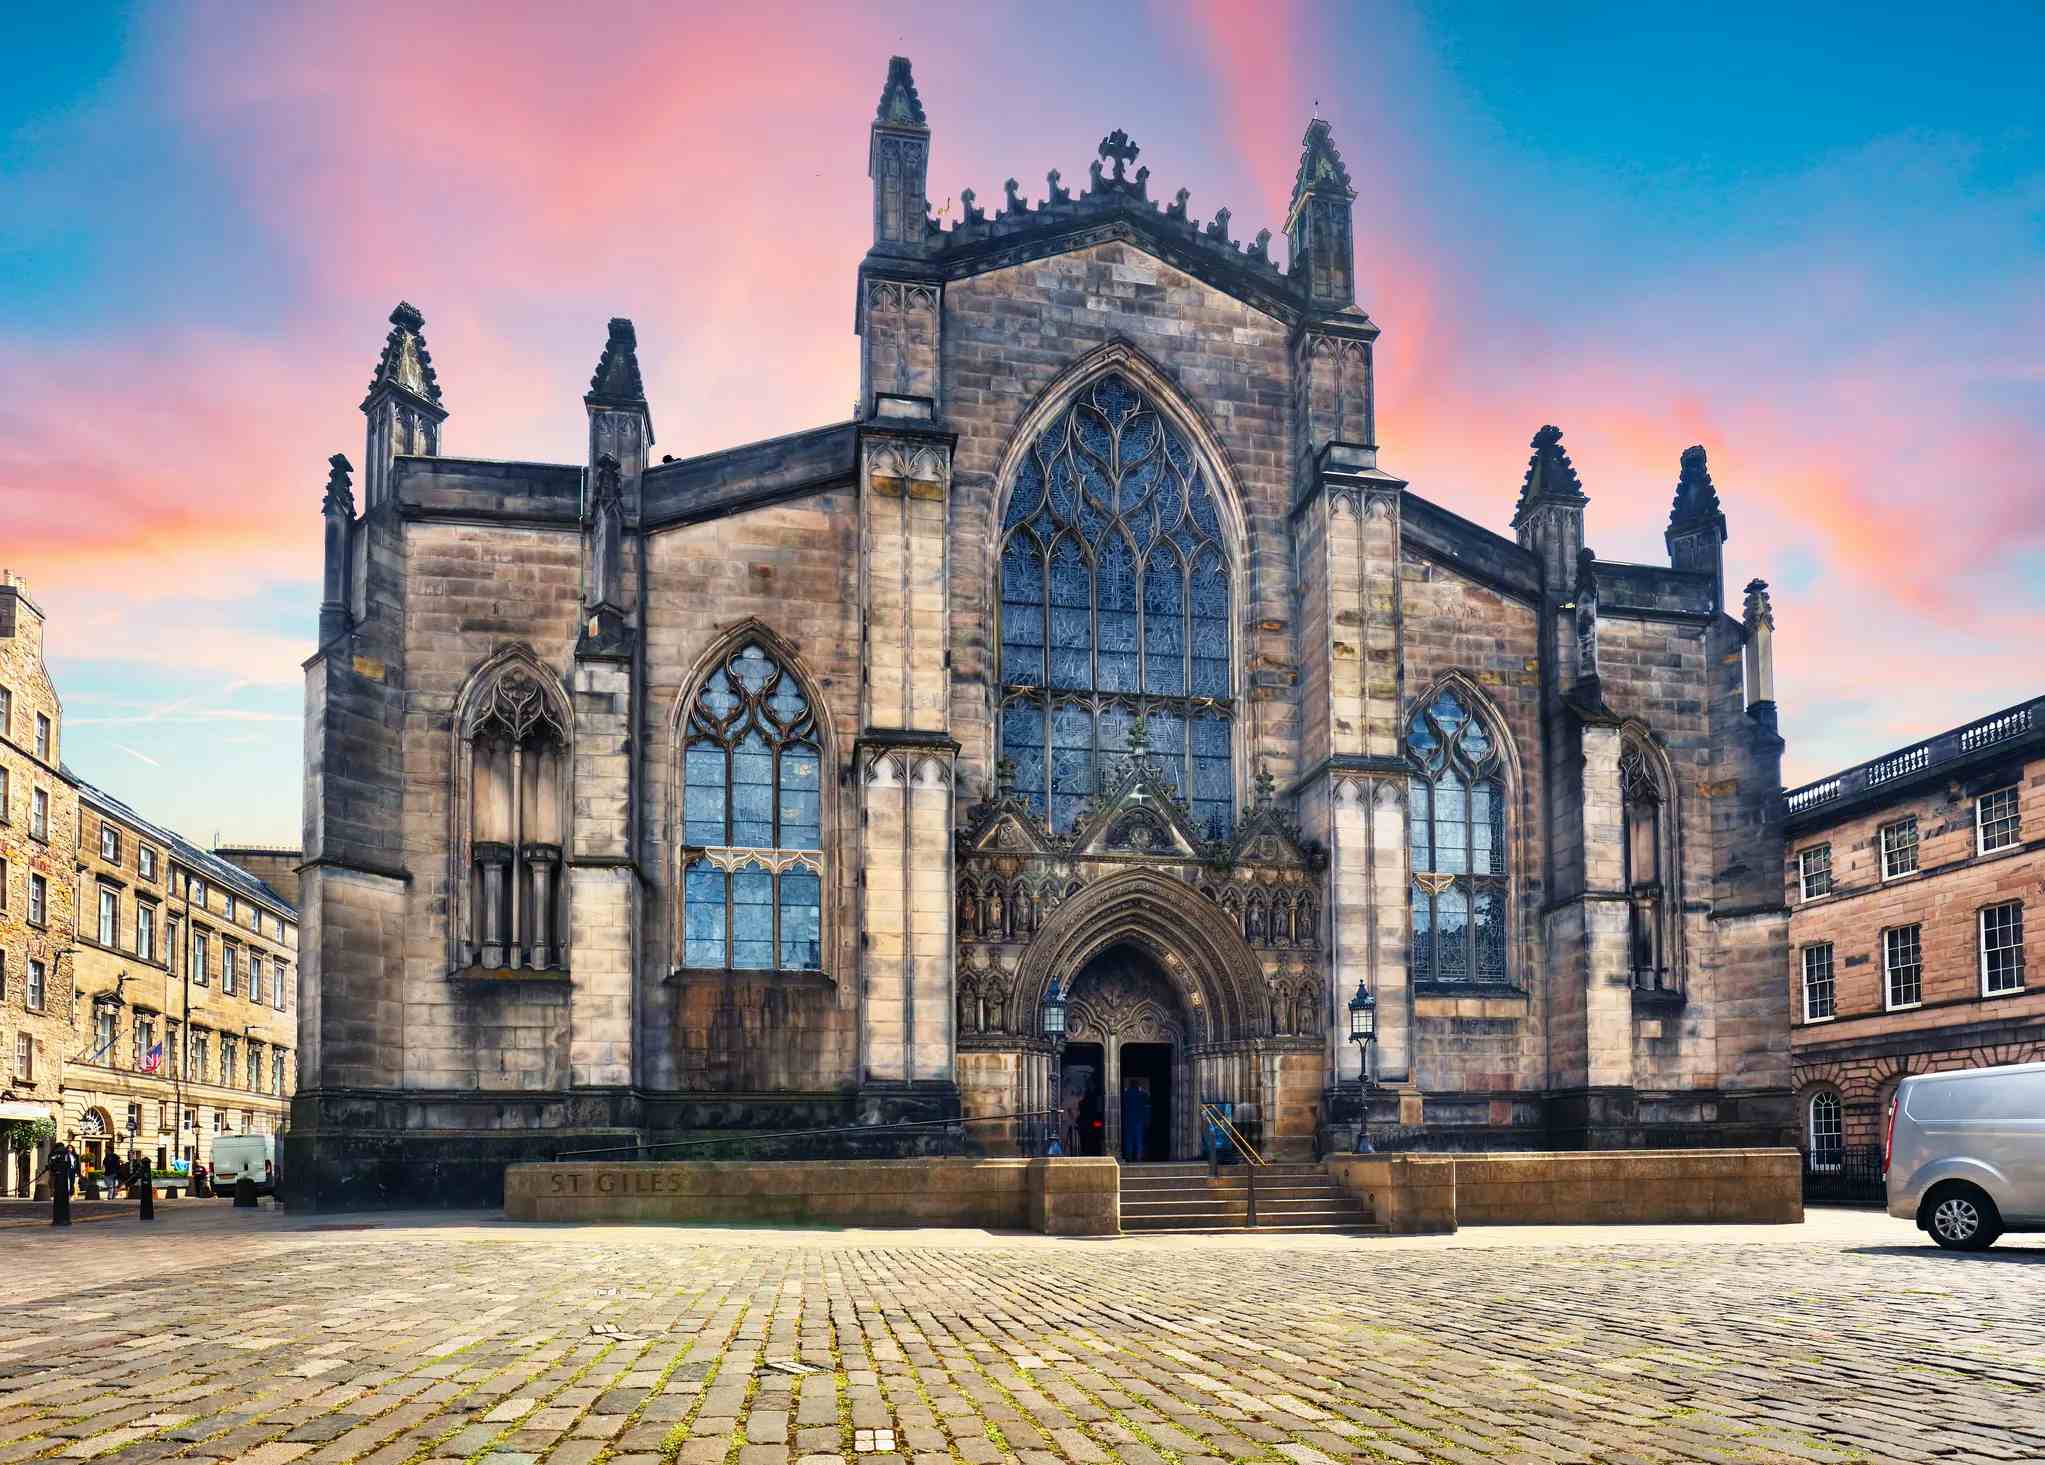 St Giles' Cathedral image